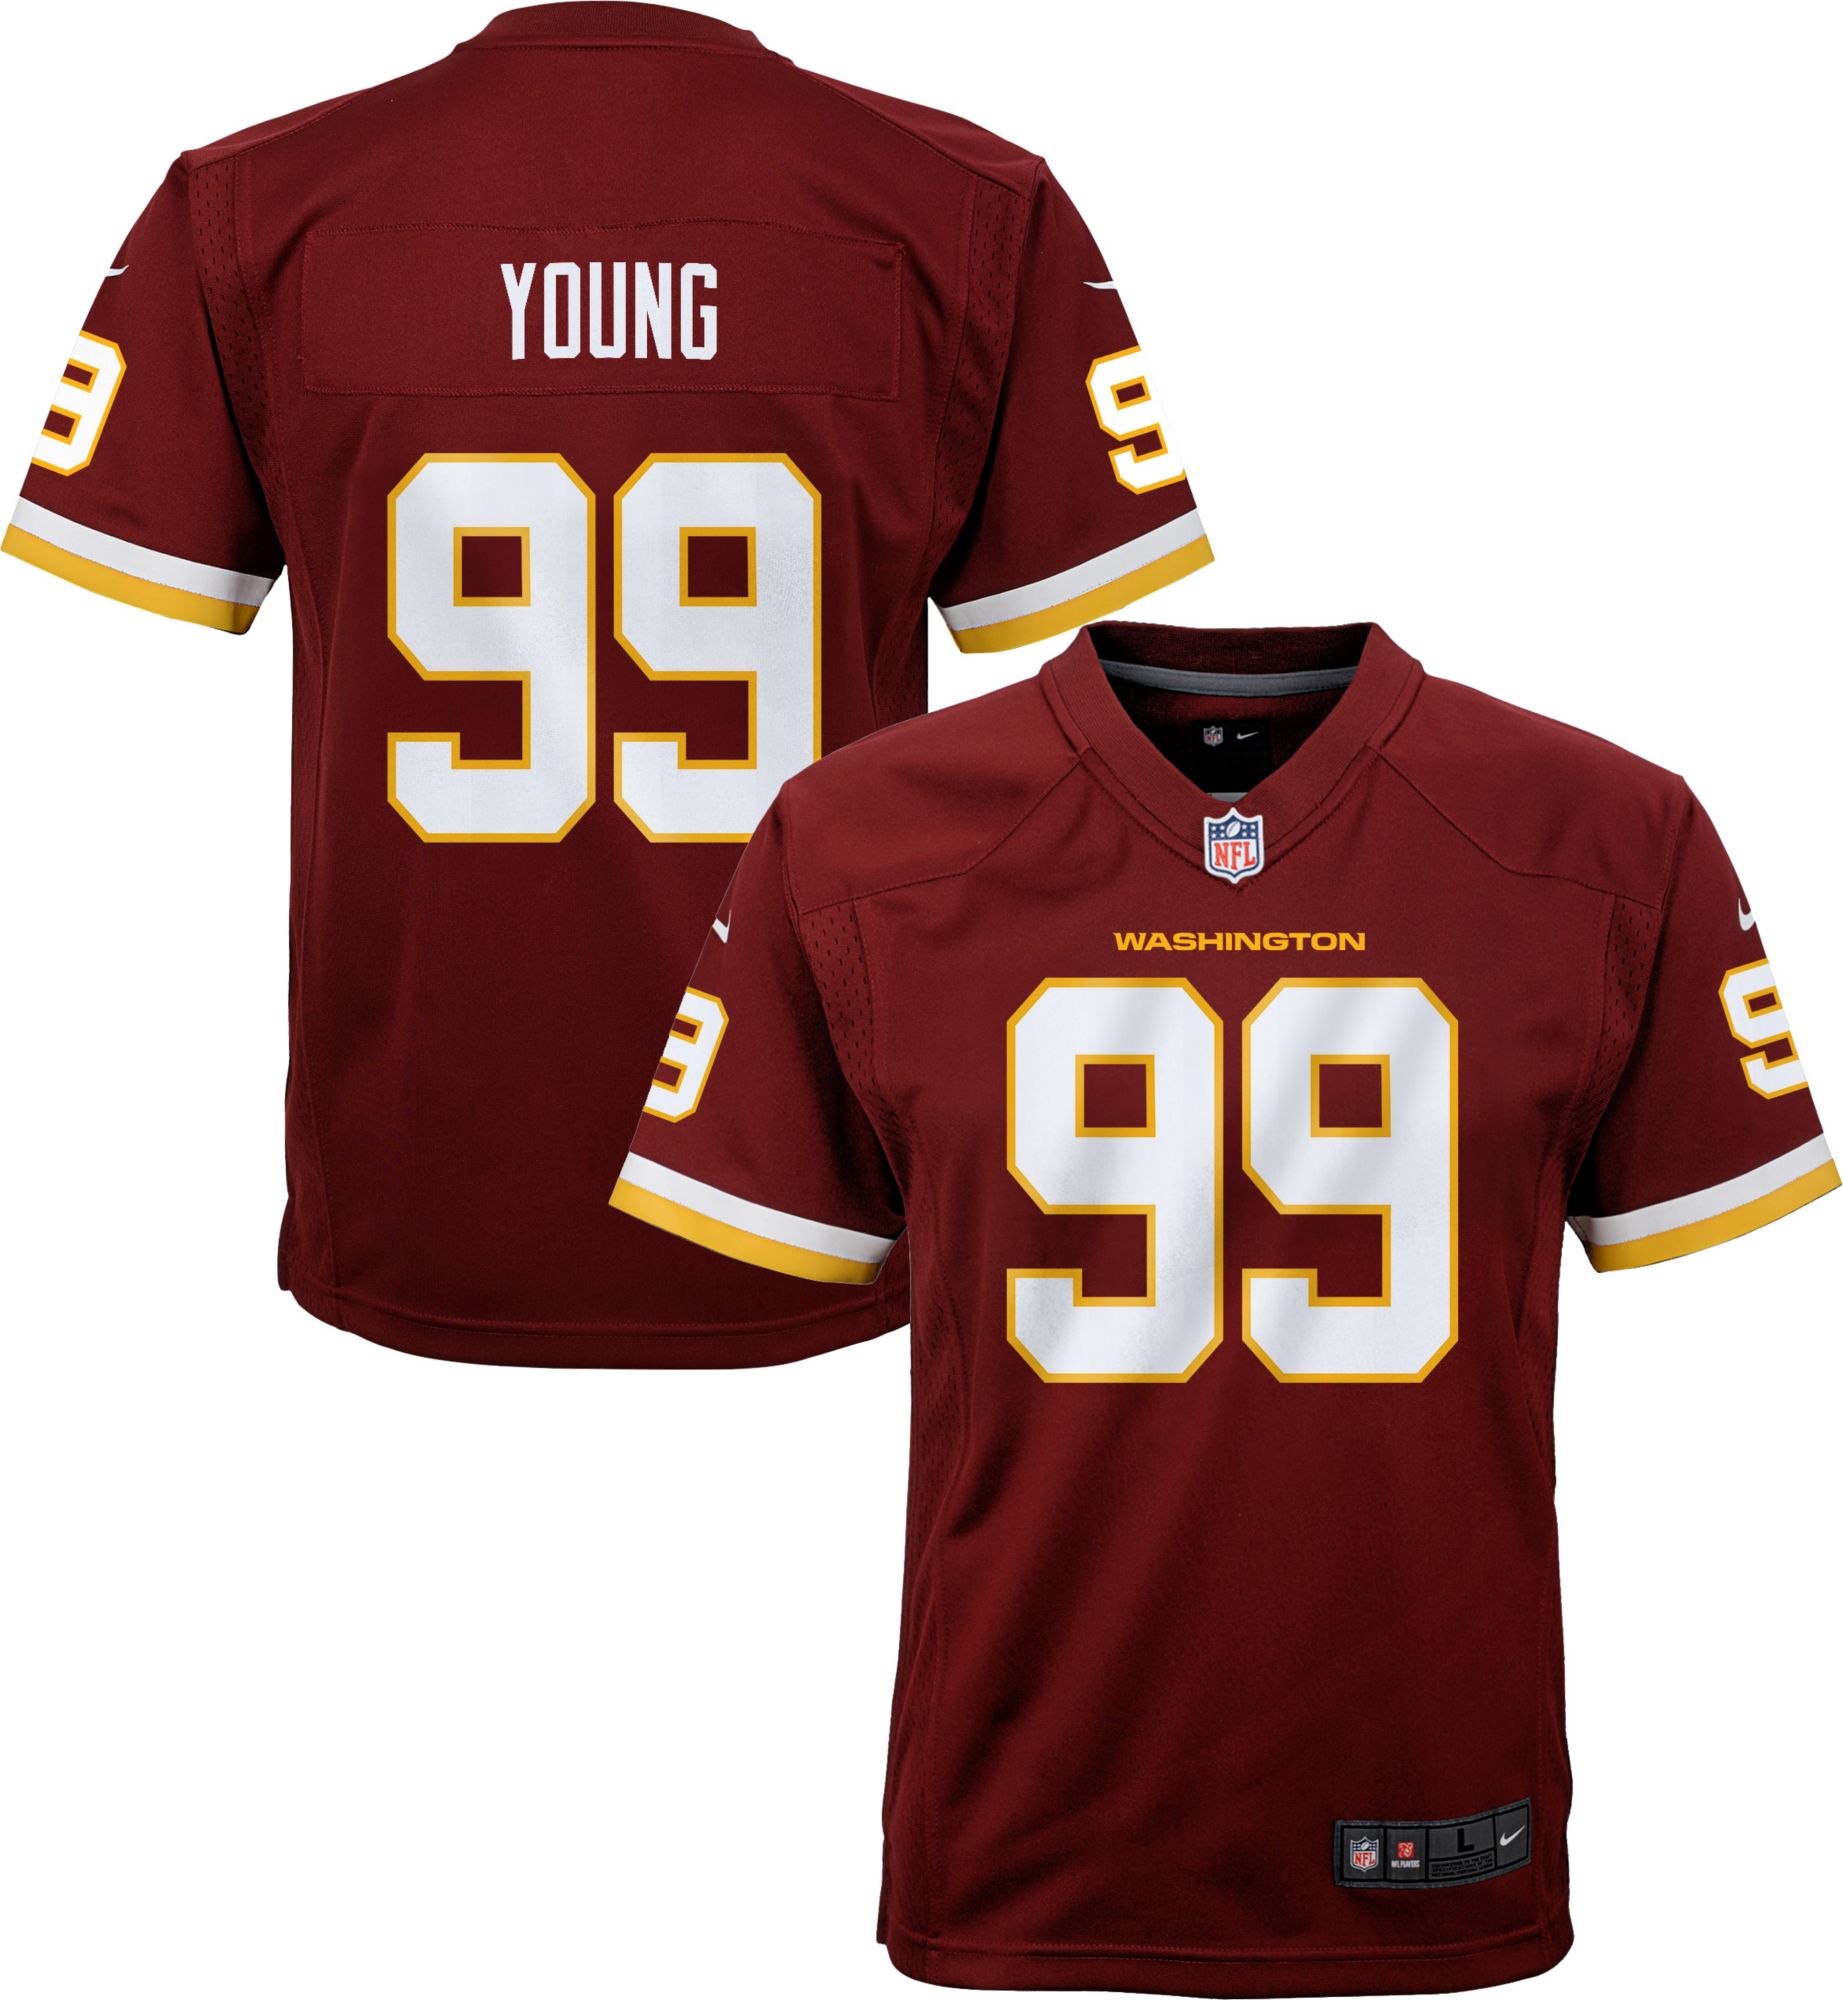 chase young jersey number